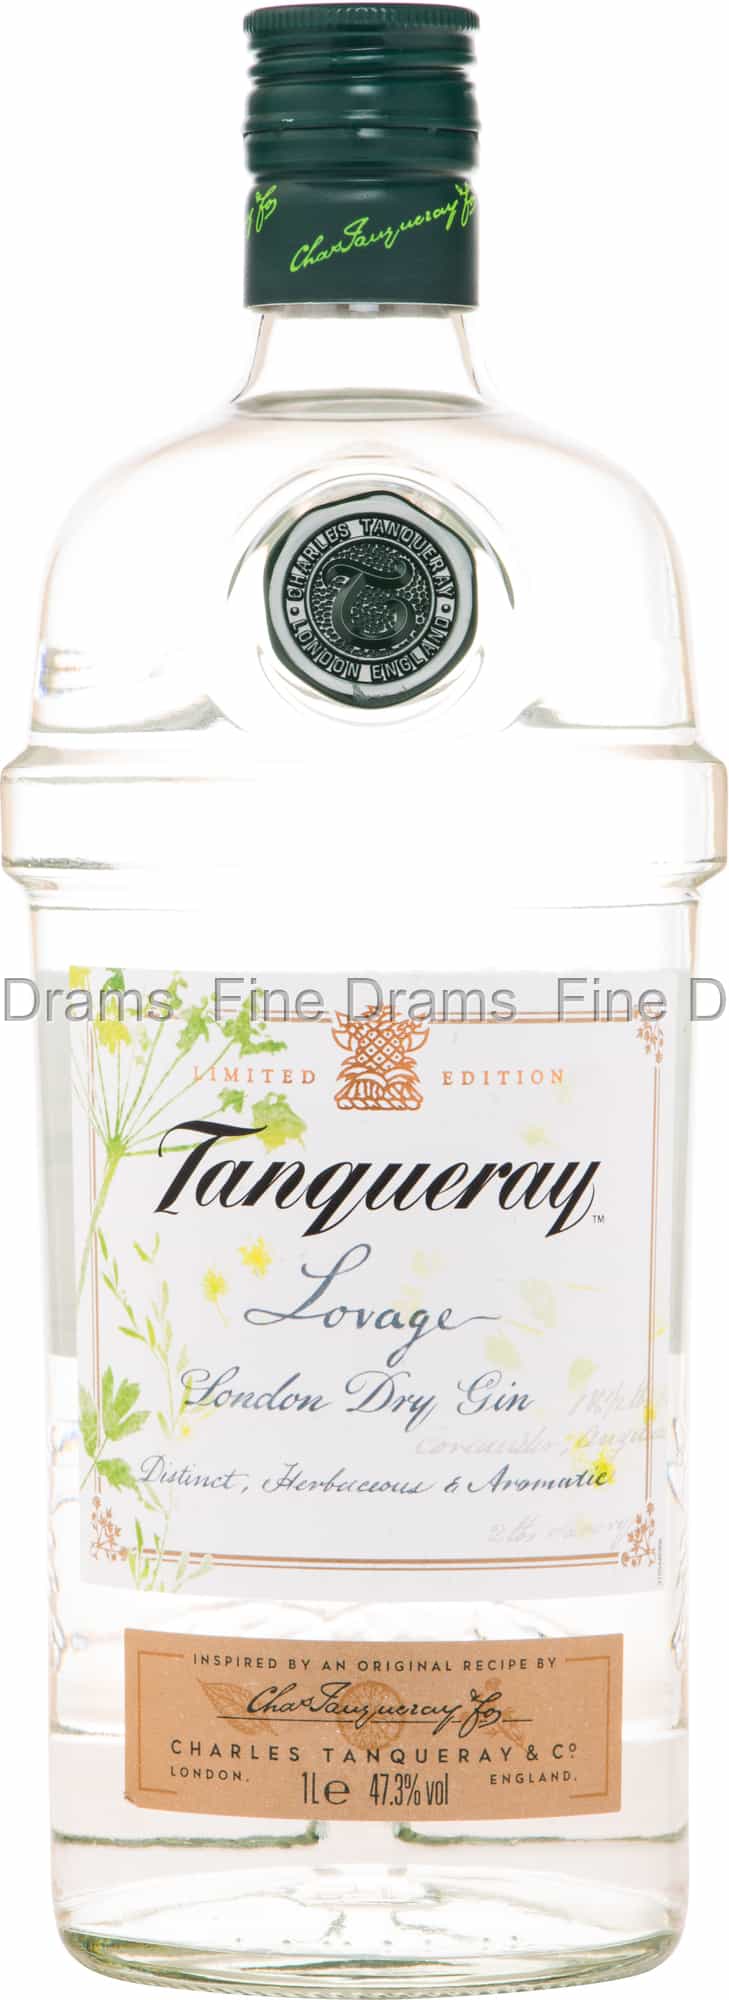 Tanqueray Gin (1 Lovage Liter)